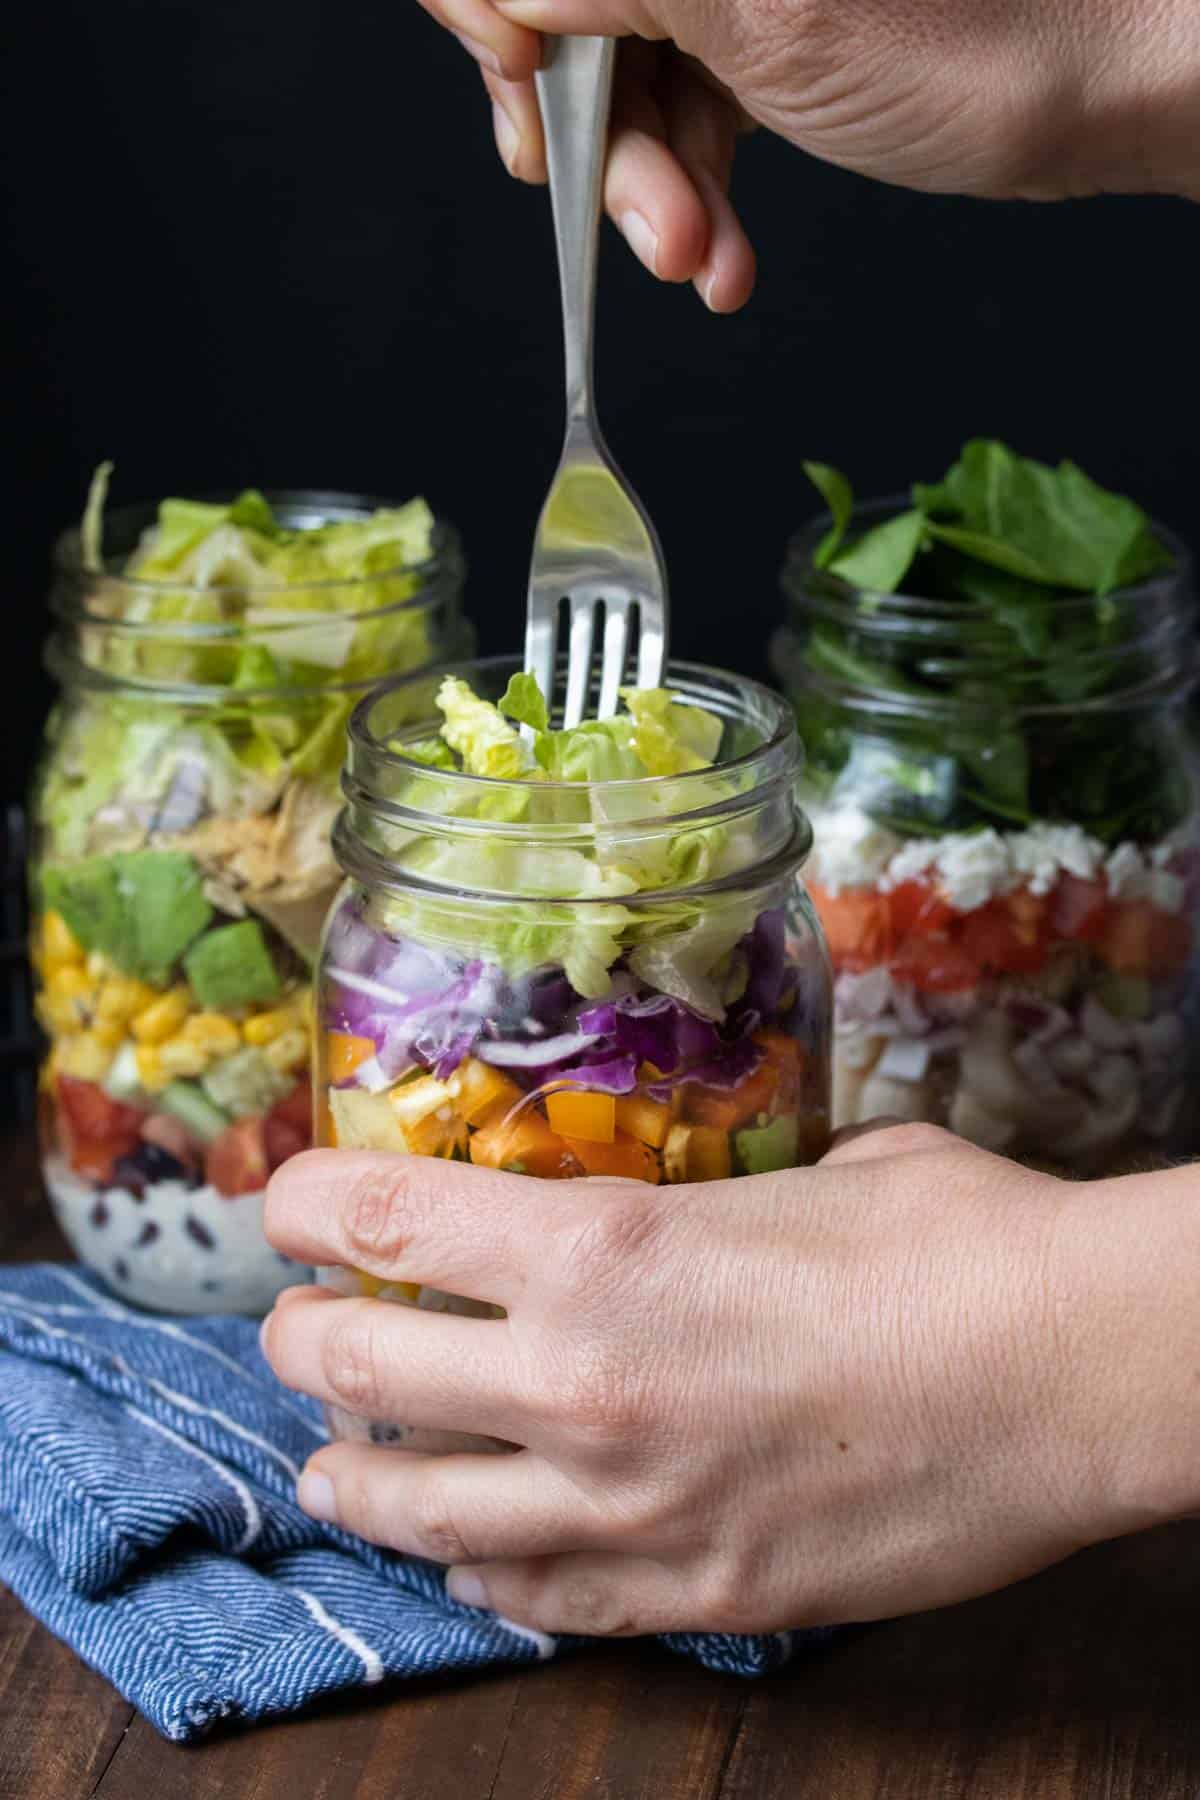 Hand holding a mason jar salad and eating it with a fork.